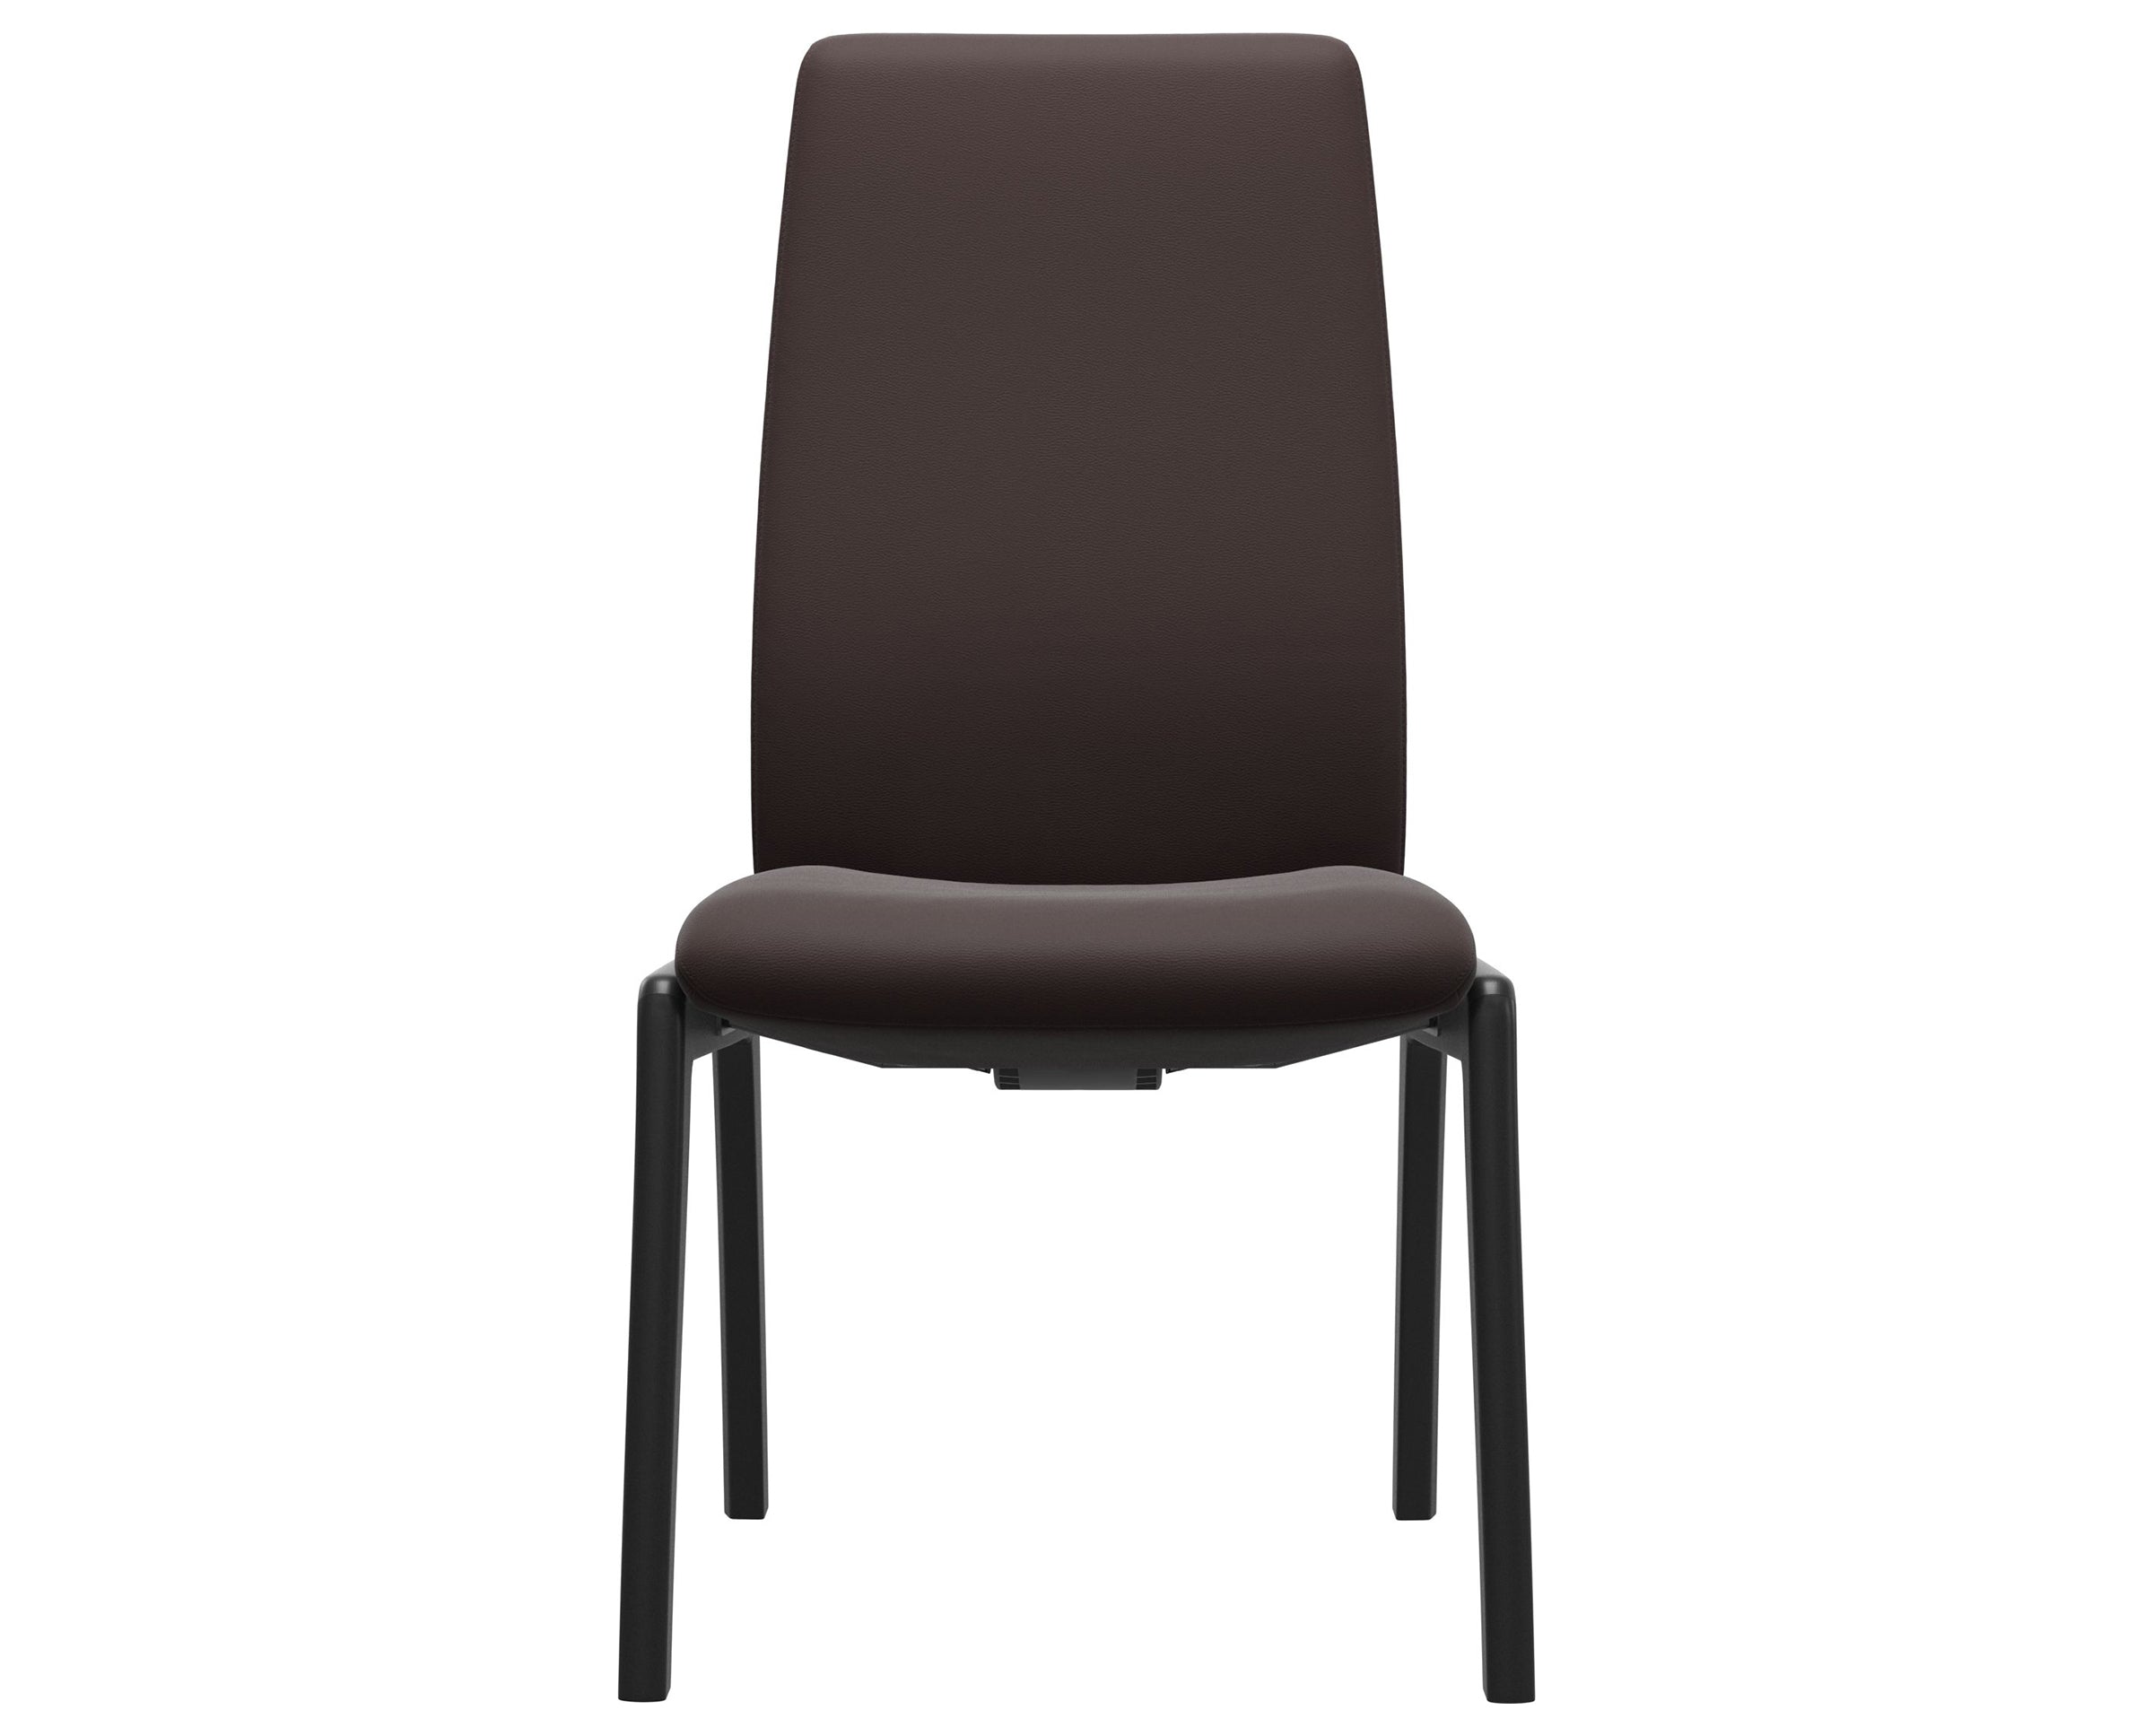 Paloma Leather Chocolate and Black Base | Stressless Laurel High Back D100 Dining Chair | Valley Ridge Furniture